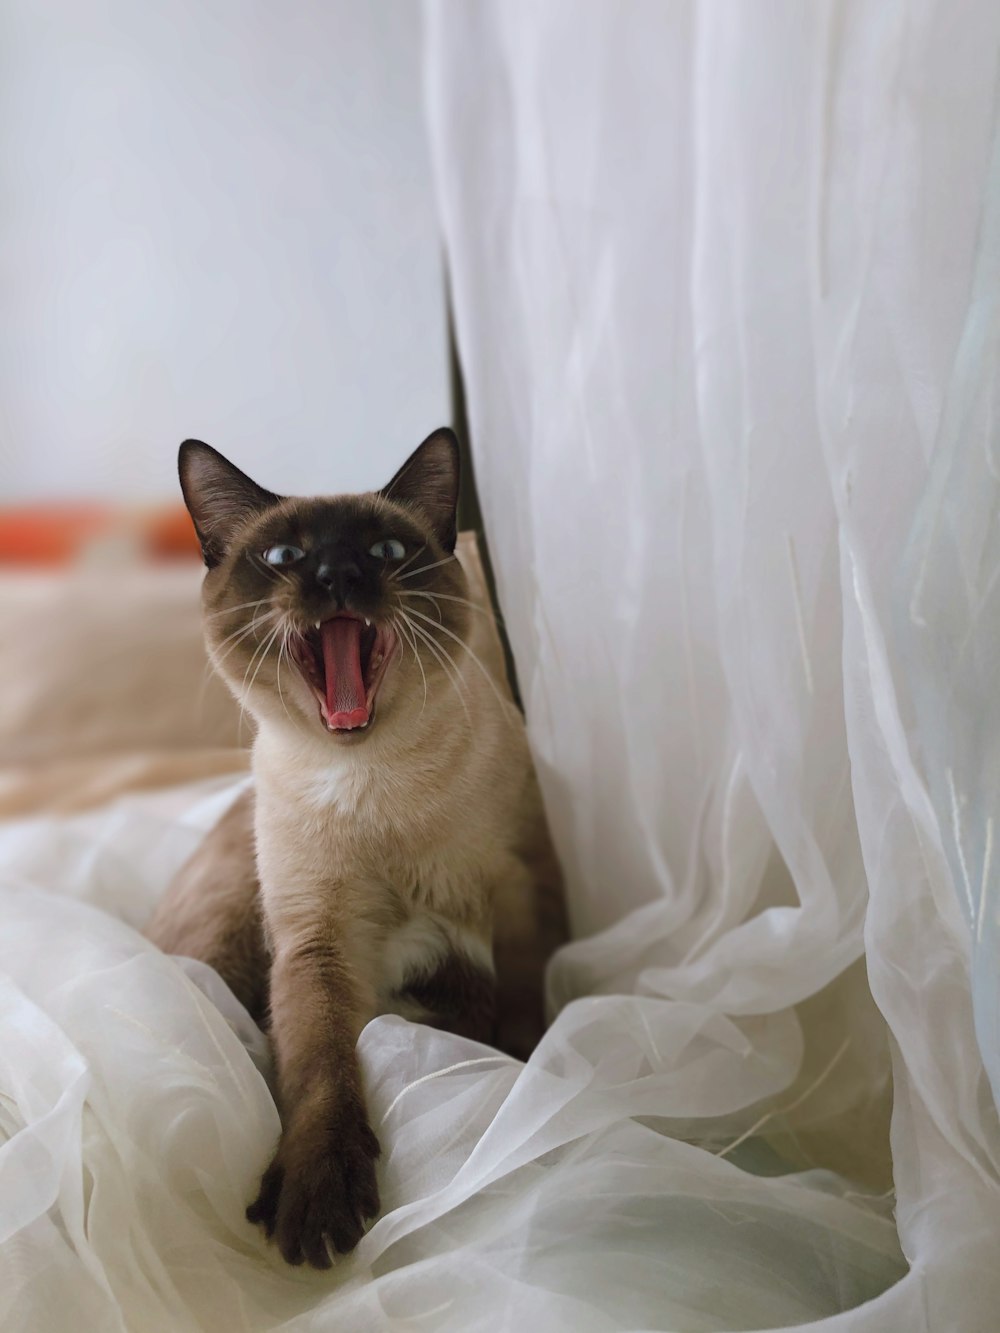 a siamese cat yawns while sitting on a bed